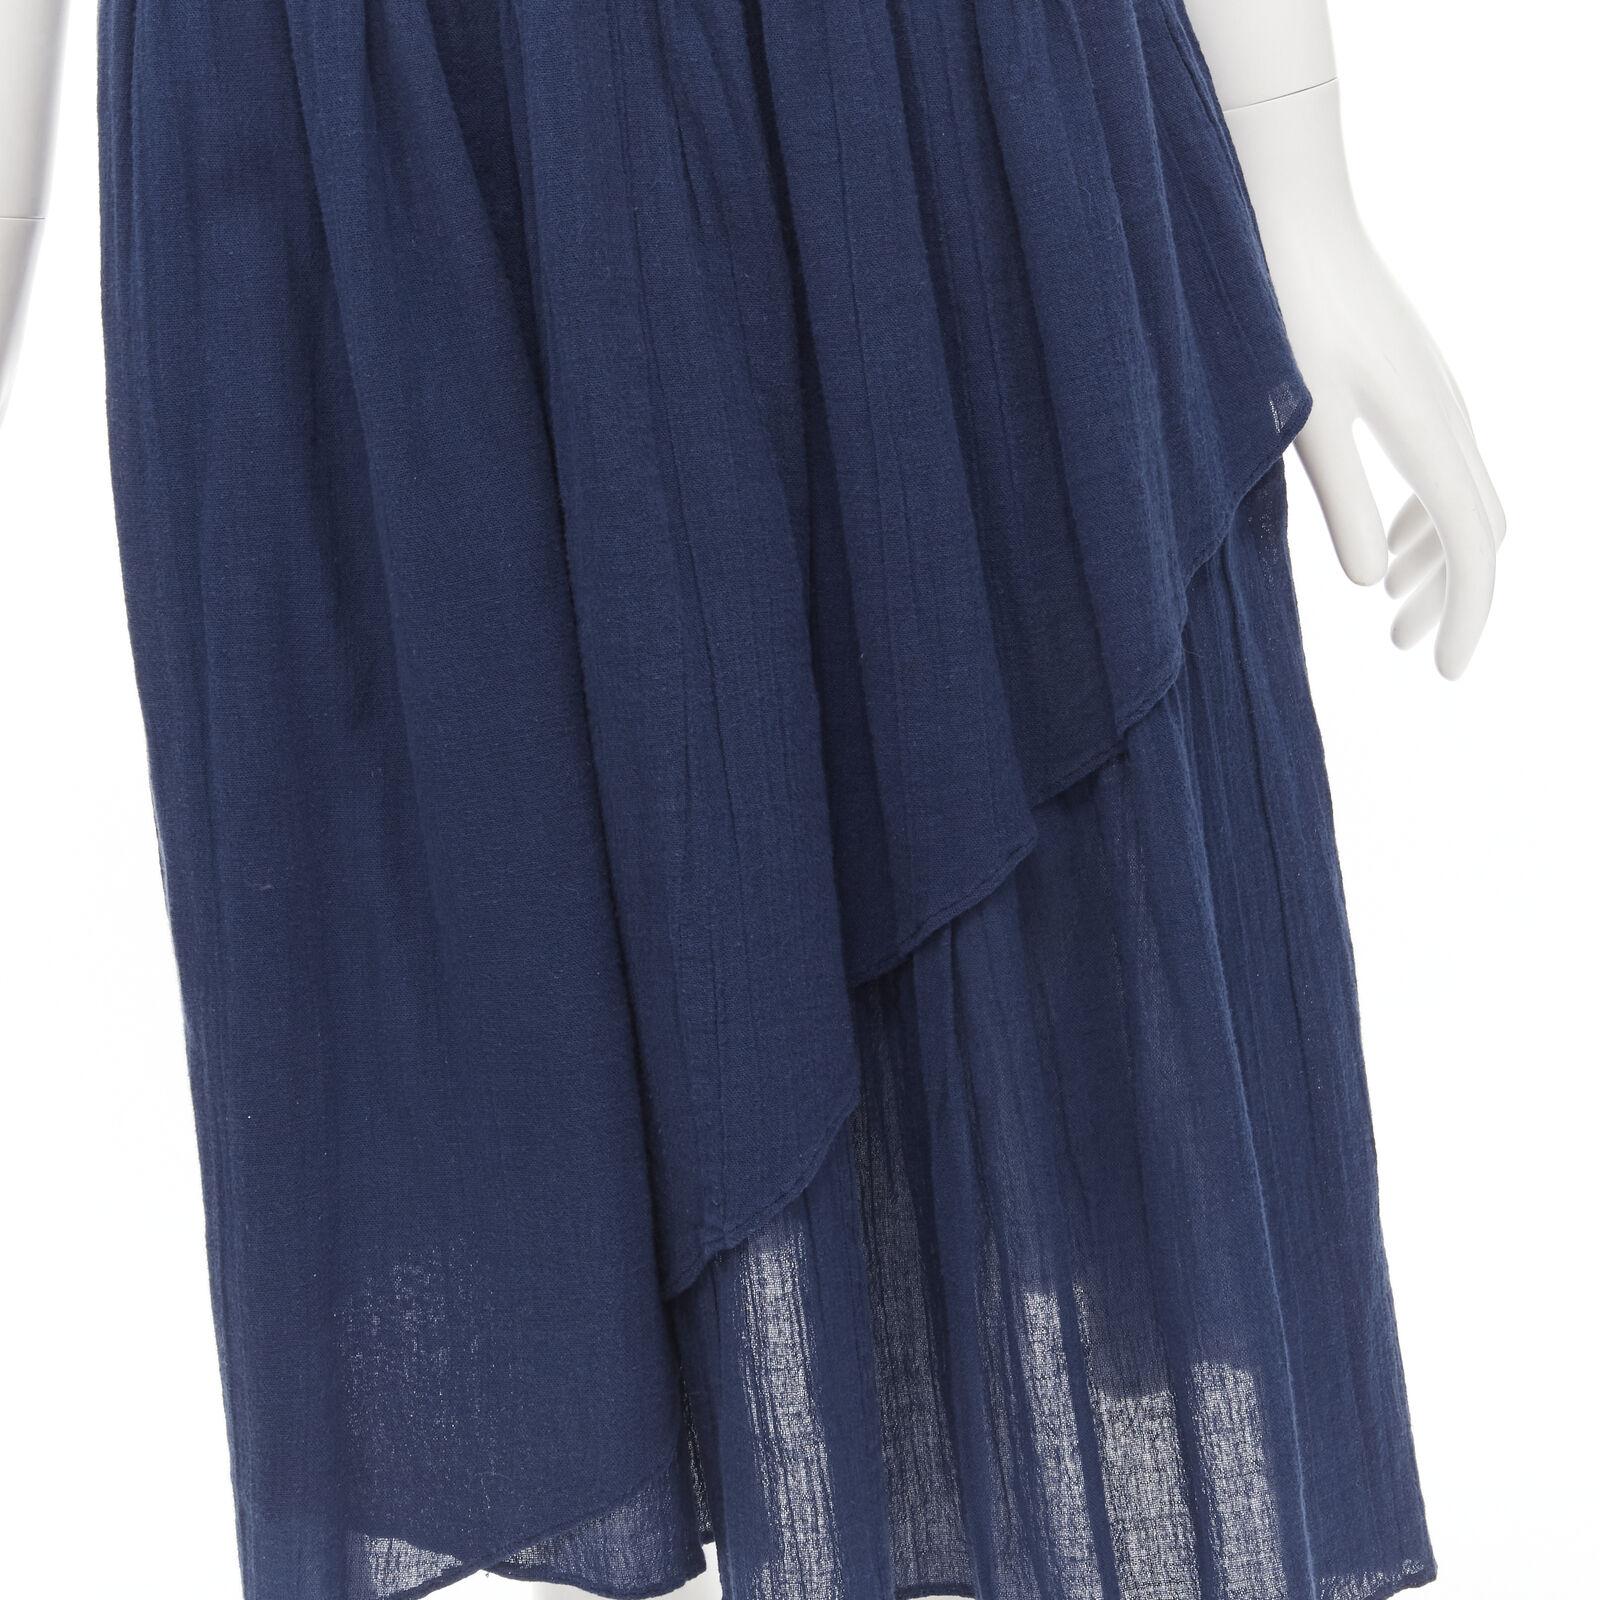 COMME DES GARCONS Vintage 1980's blue crinkled asymmetric waterfall draped skirt
Reference: CRTI/A00691
Brand: Comme Des Garcons
Designer: Rei Kawakubo
Collection: 1980s
Material: Cotton
Color: Blue
Pattern: Solid
Closure: Hook &